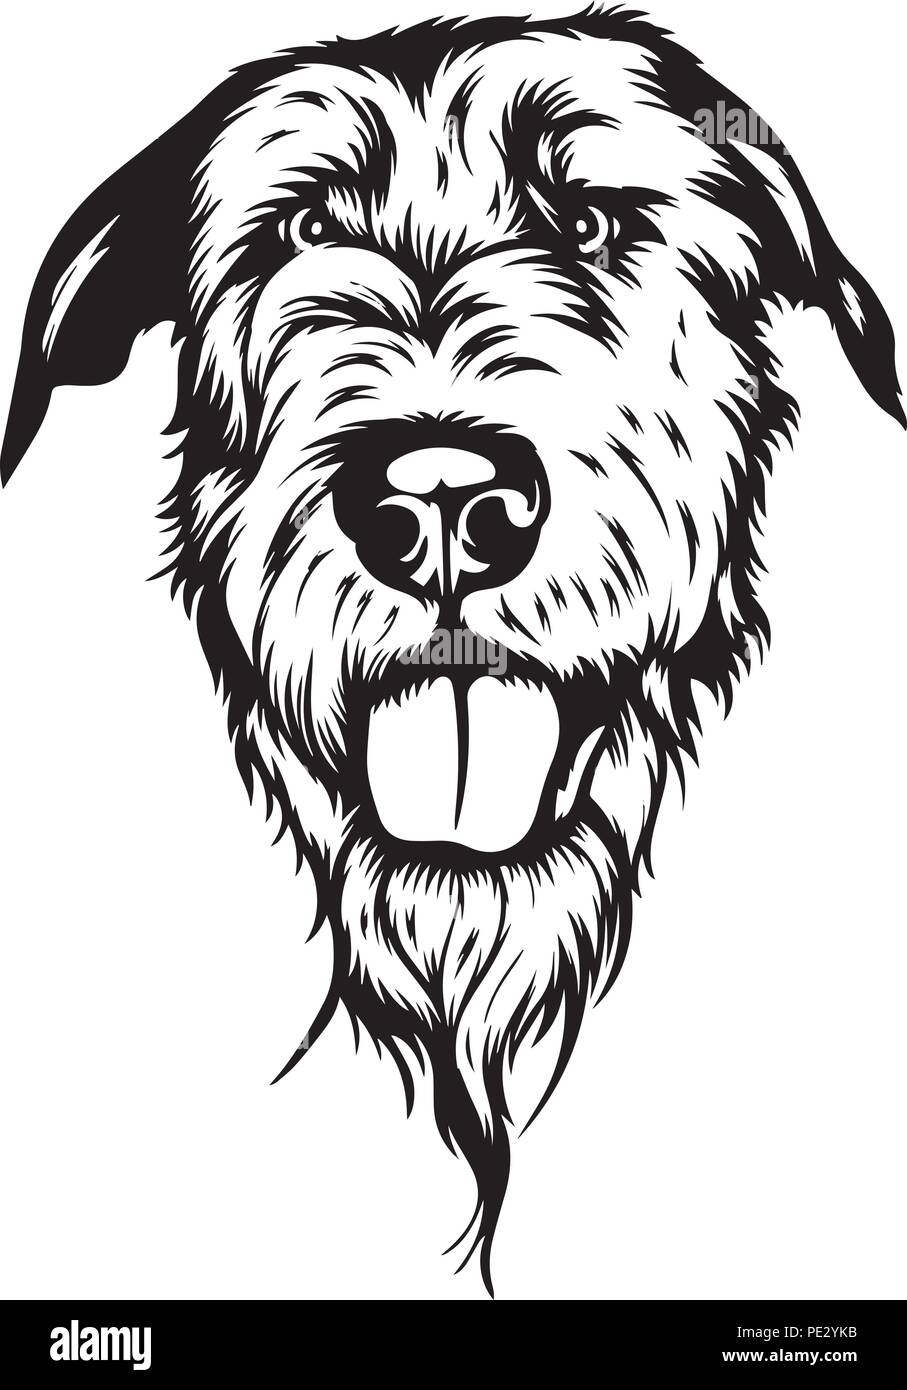 Irish Wolfhound Dog Breed Pet Puppy Isolated Head Face Stock Vector